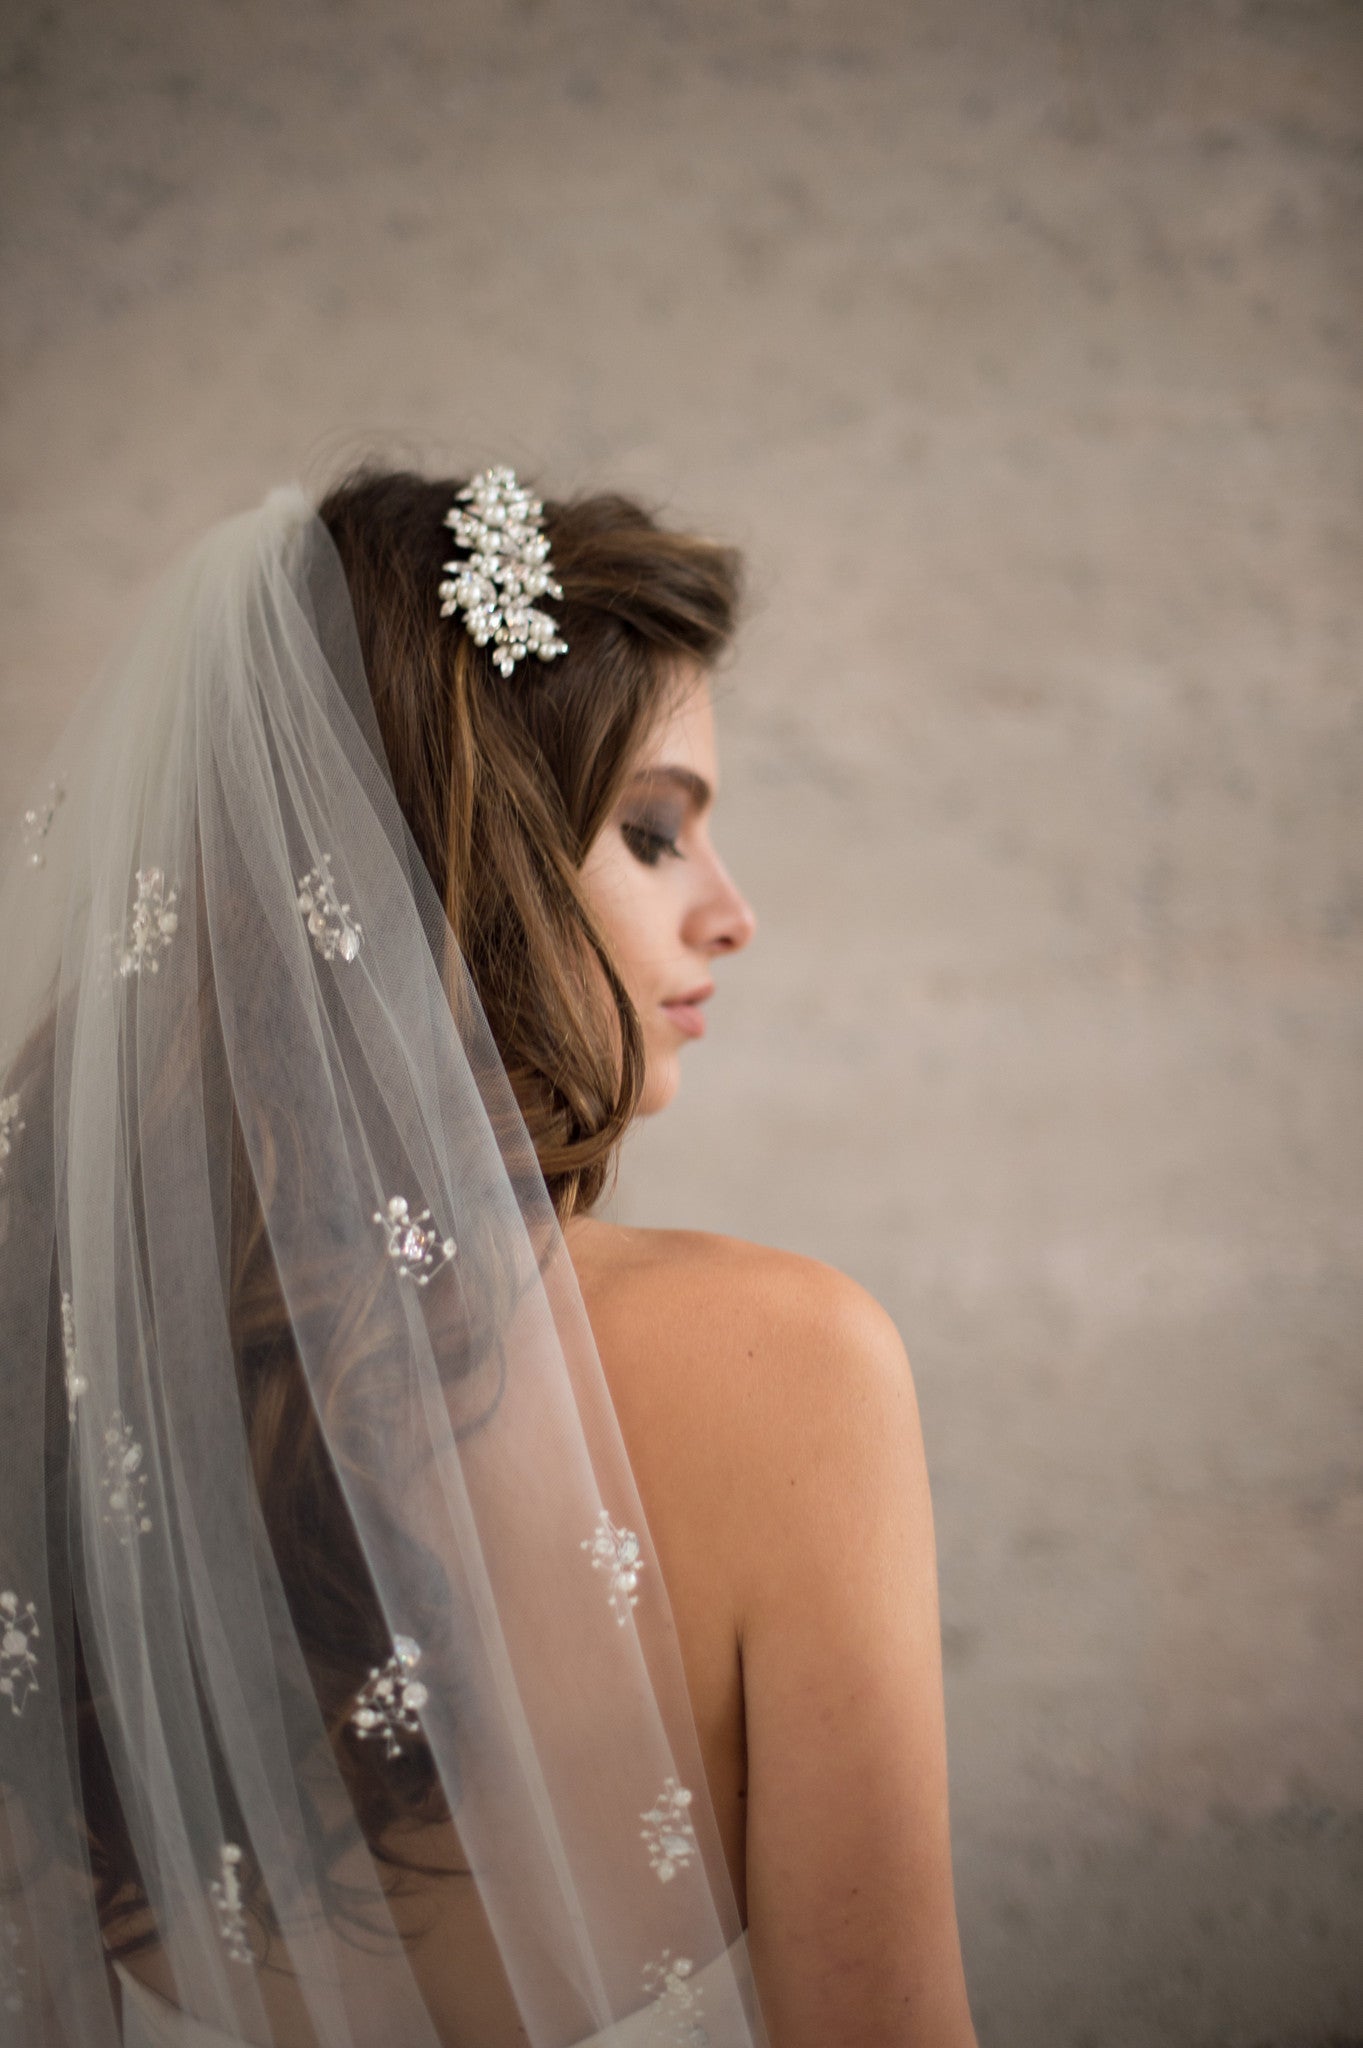 Bridal Accessories and Wedding Jewelry, Camilla Christine, Veil, Celine, Ivory, Cathedral Veil featuring a Cascade of Hand-Beaded Pearl & Crystal Clusters on a Soft Sheer Tulle